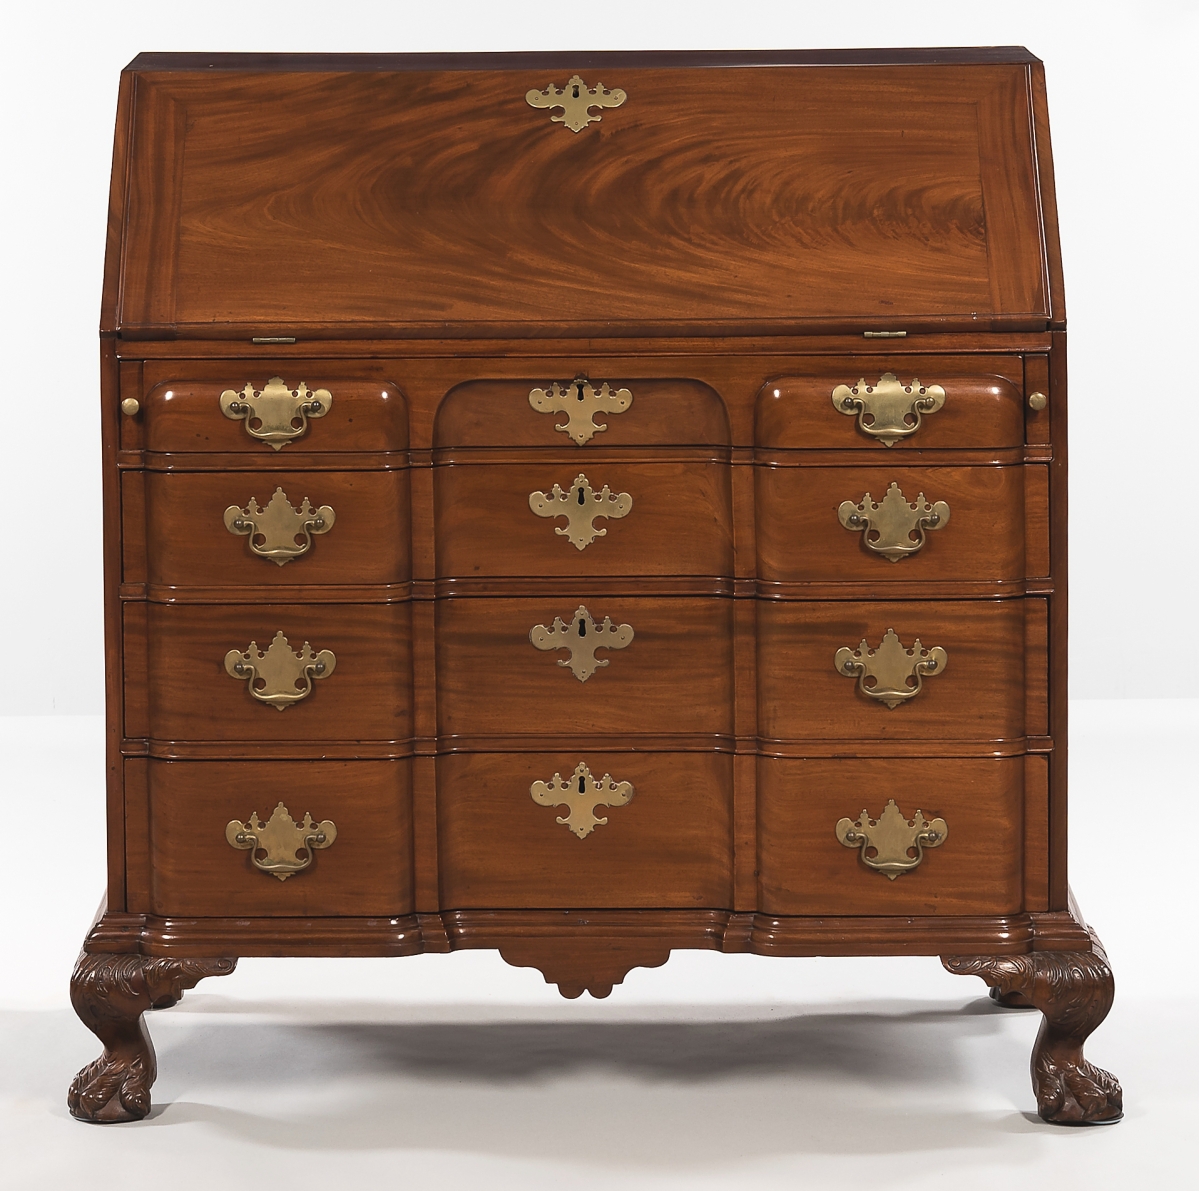 One of the two pieces of furniture that tied for first place in the sale was this circa 1760-80 refinished Boston blockfront desk, which had fan-carved serpentine interior drawers and hidden compartments. It finished at $25,000.